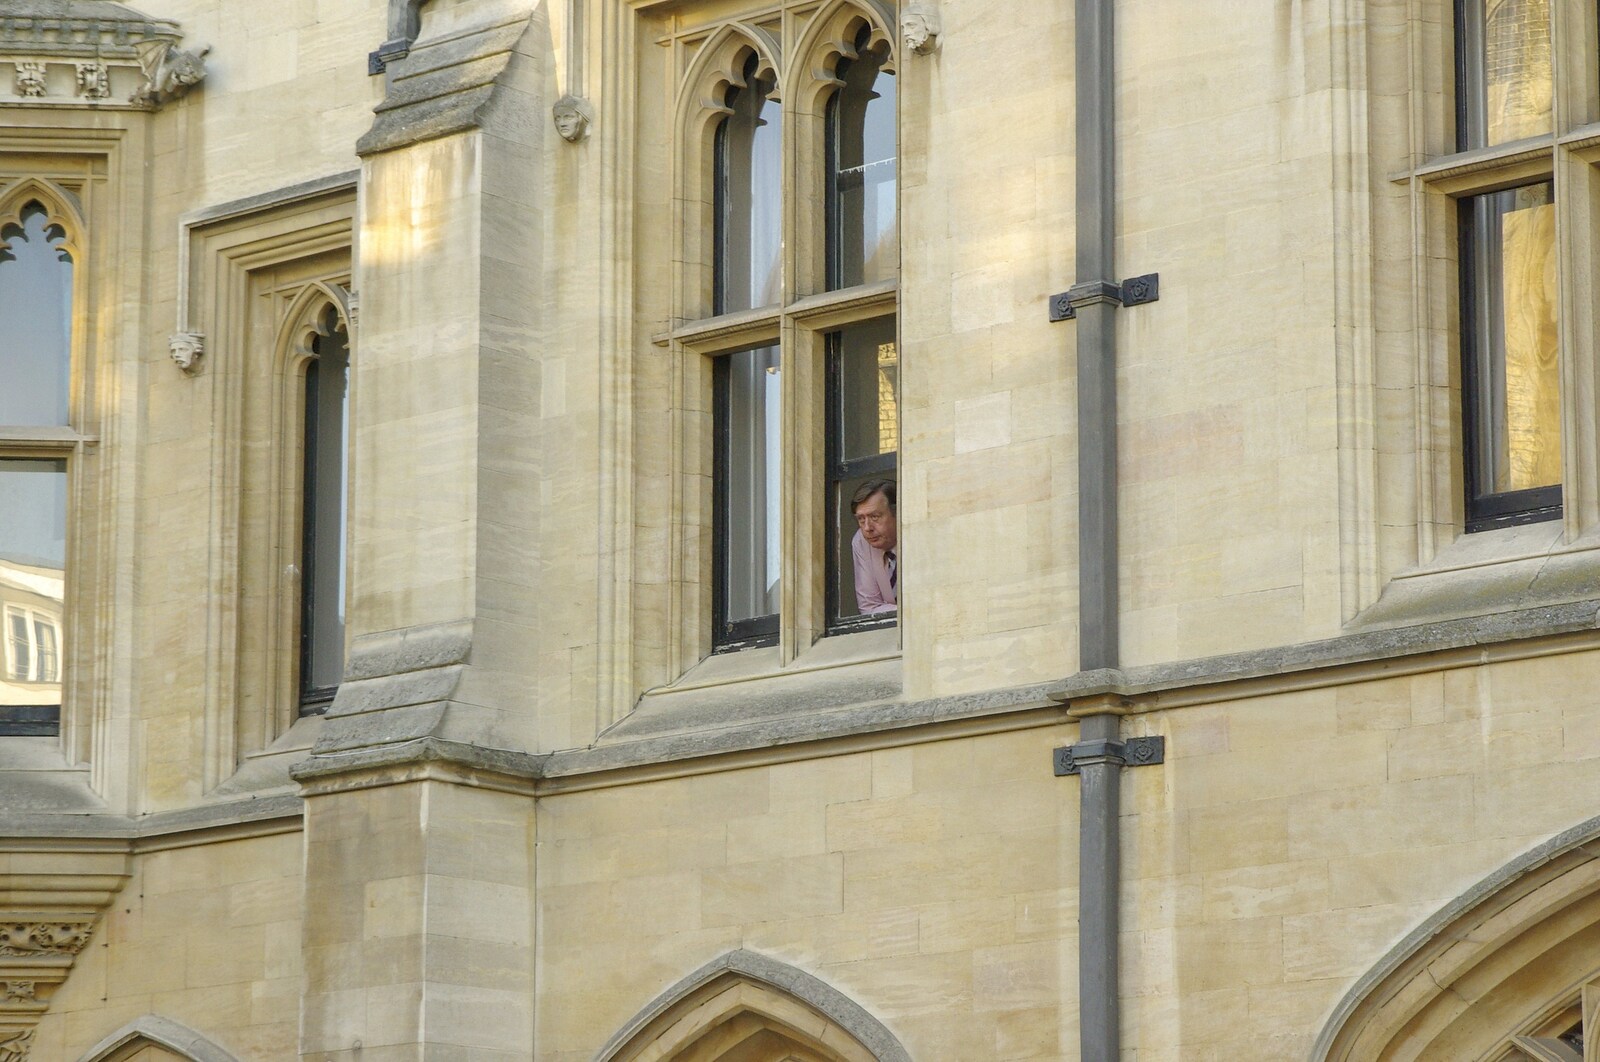 A Brief Time in History: Stephen Hawking and the Corpus Christi Clock, Benet Street, Cambridge - 19th September 2008: Some college dude peers out from his study window